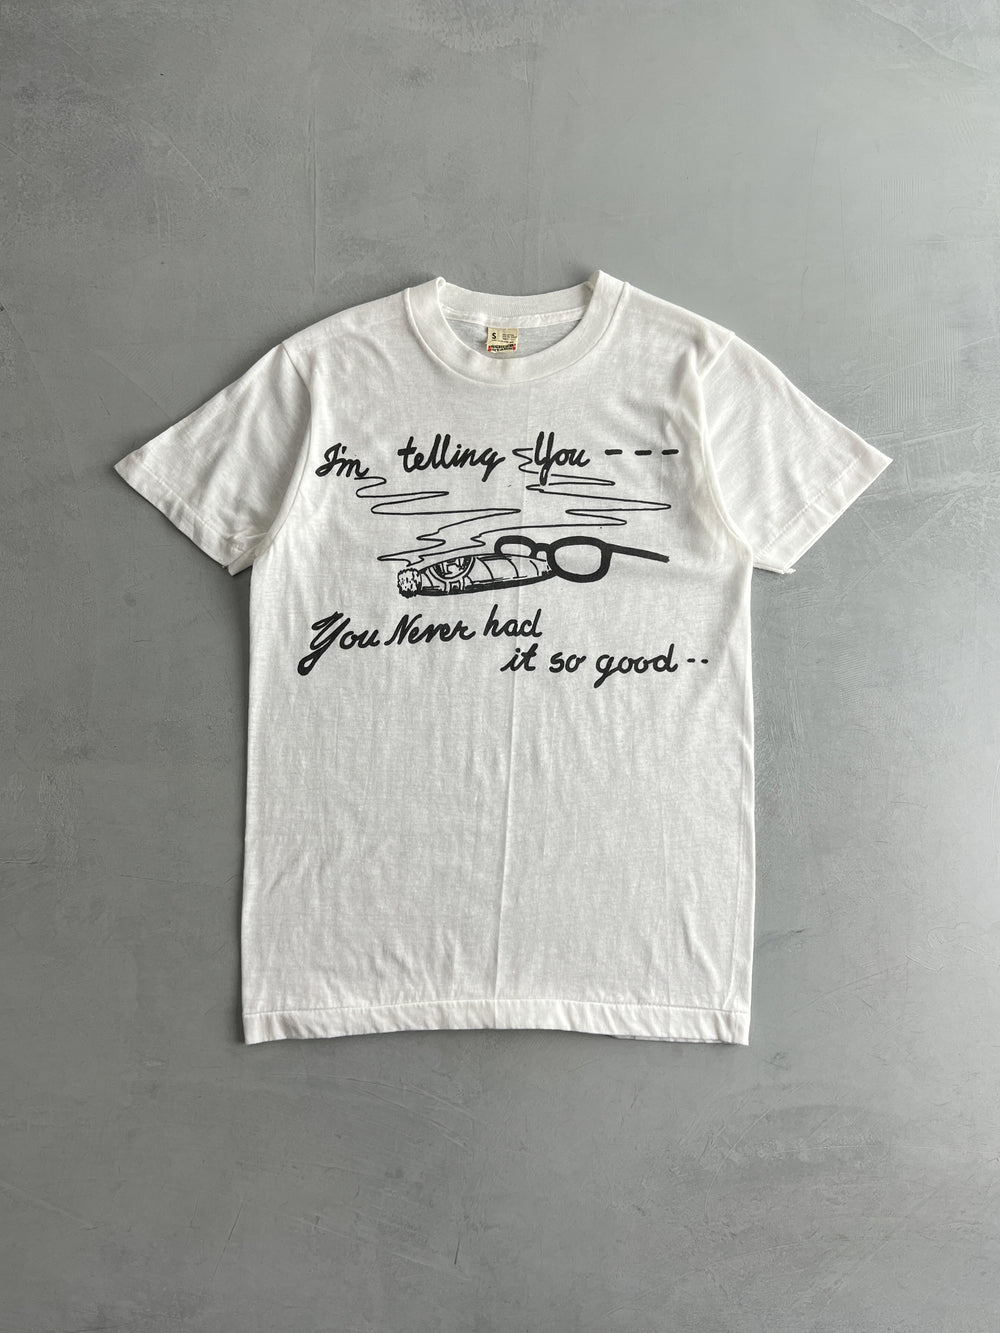 80's "I'm Telling You ---You never had it so good" Tee [S]